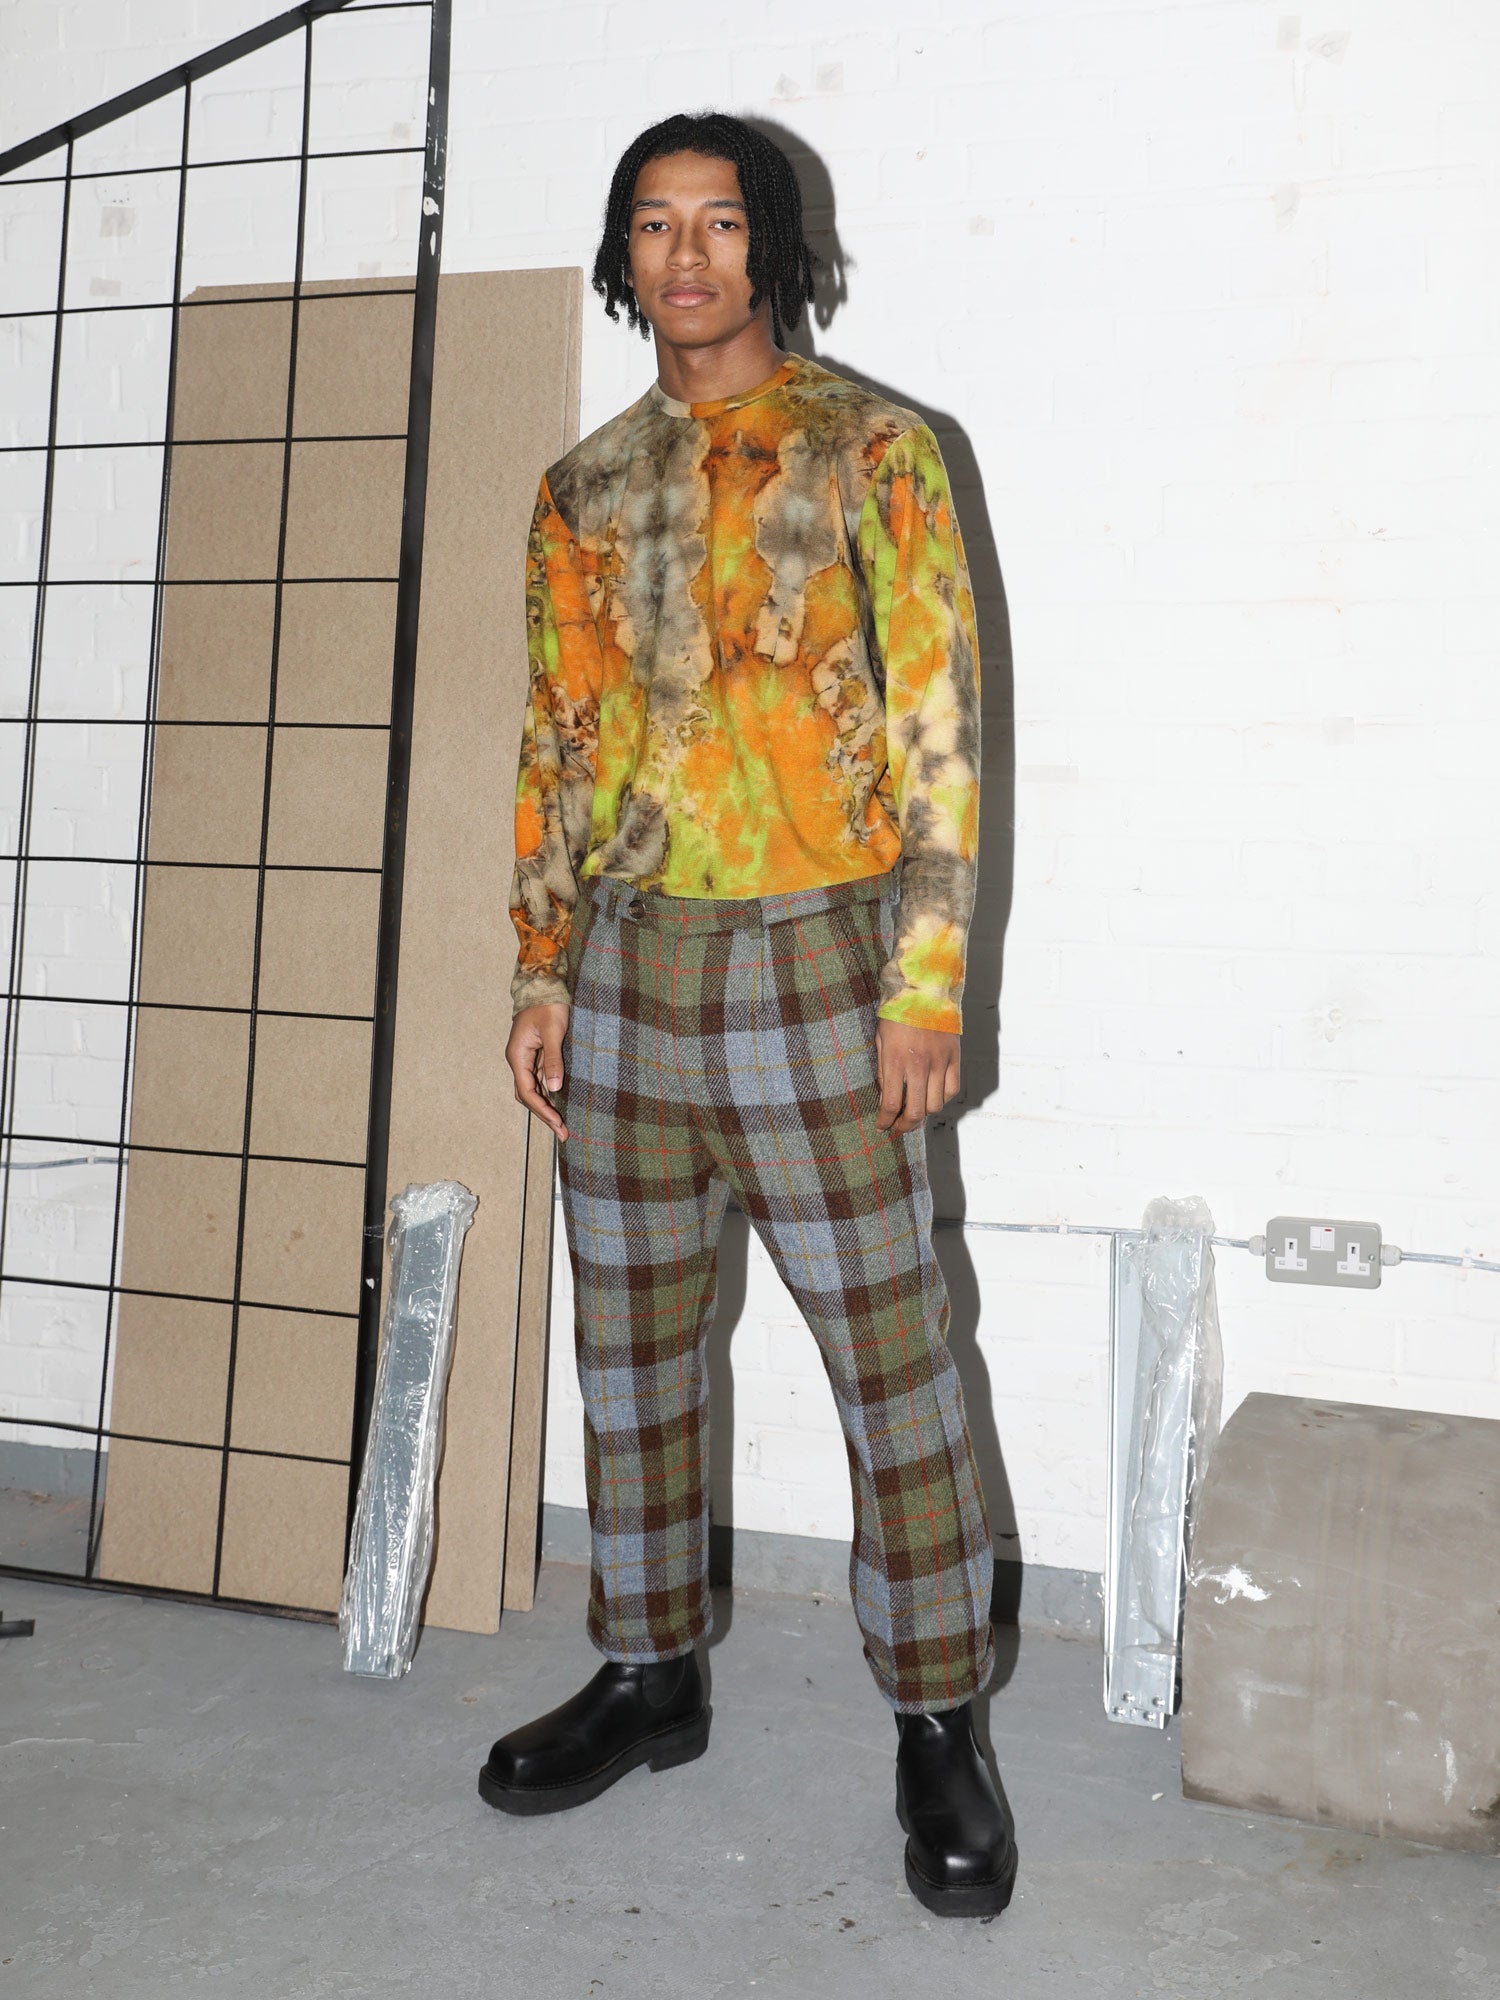 Model is styled in Rada Rada Canopy Acid, tie dye long sleeve t shirt. Styled with checkered woollen trousers. The pieces clash but work well.  